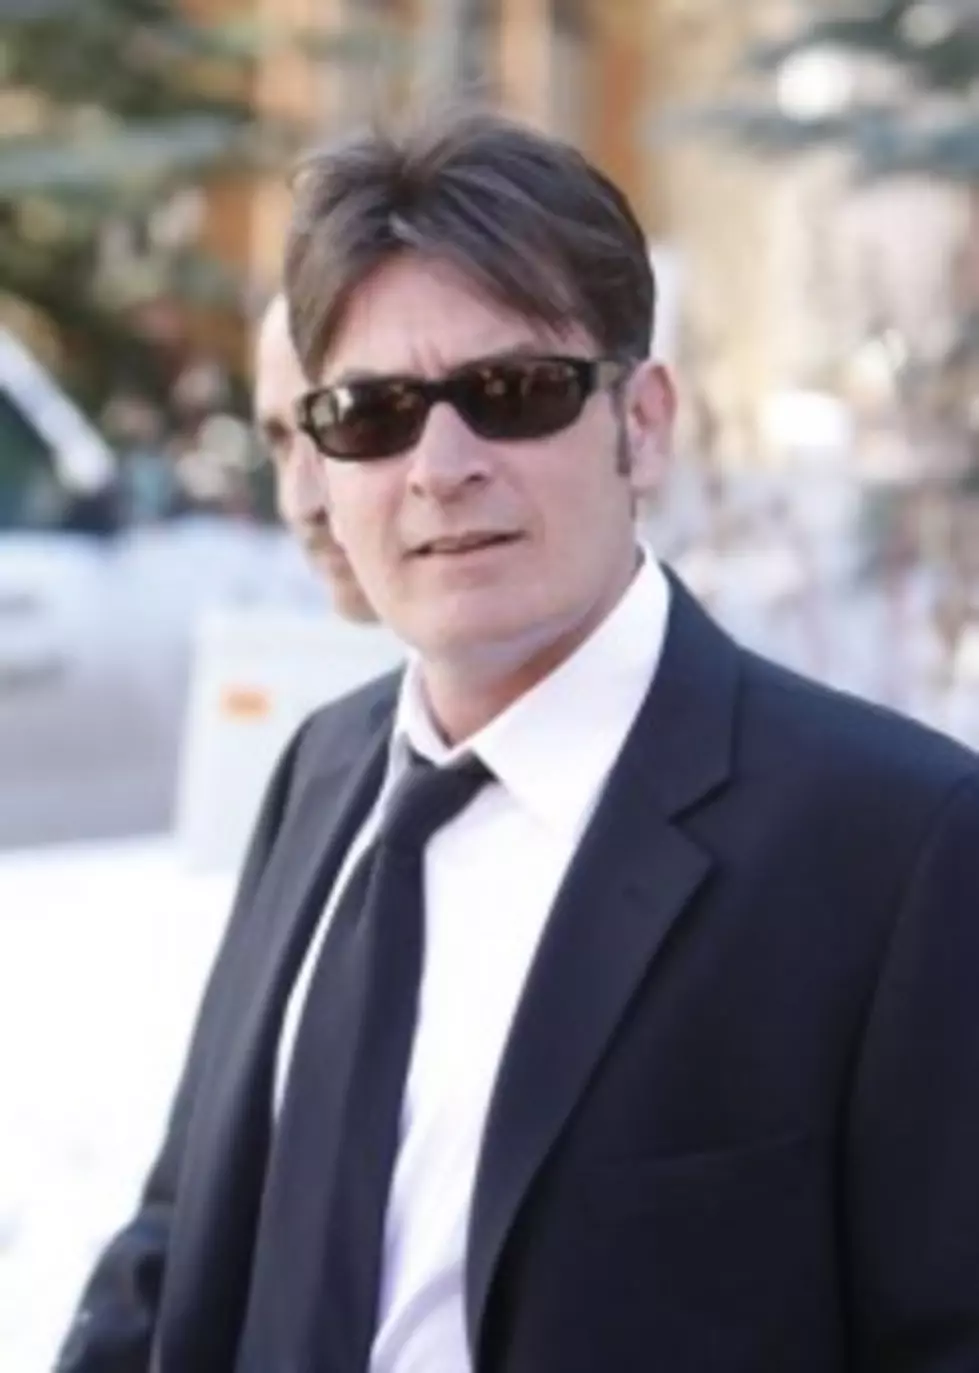 Charlie Sheen in Dallas Wednesday